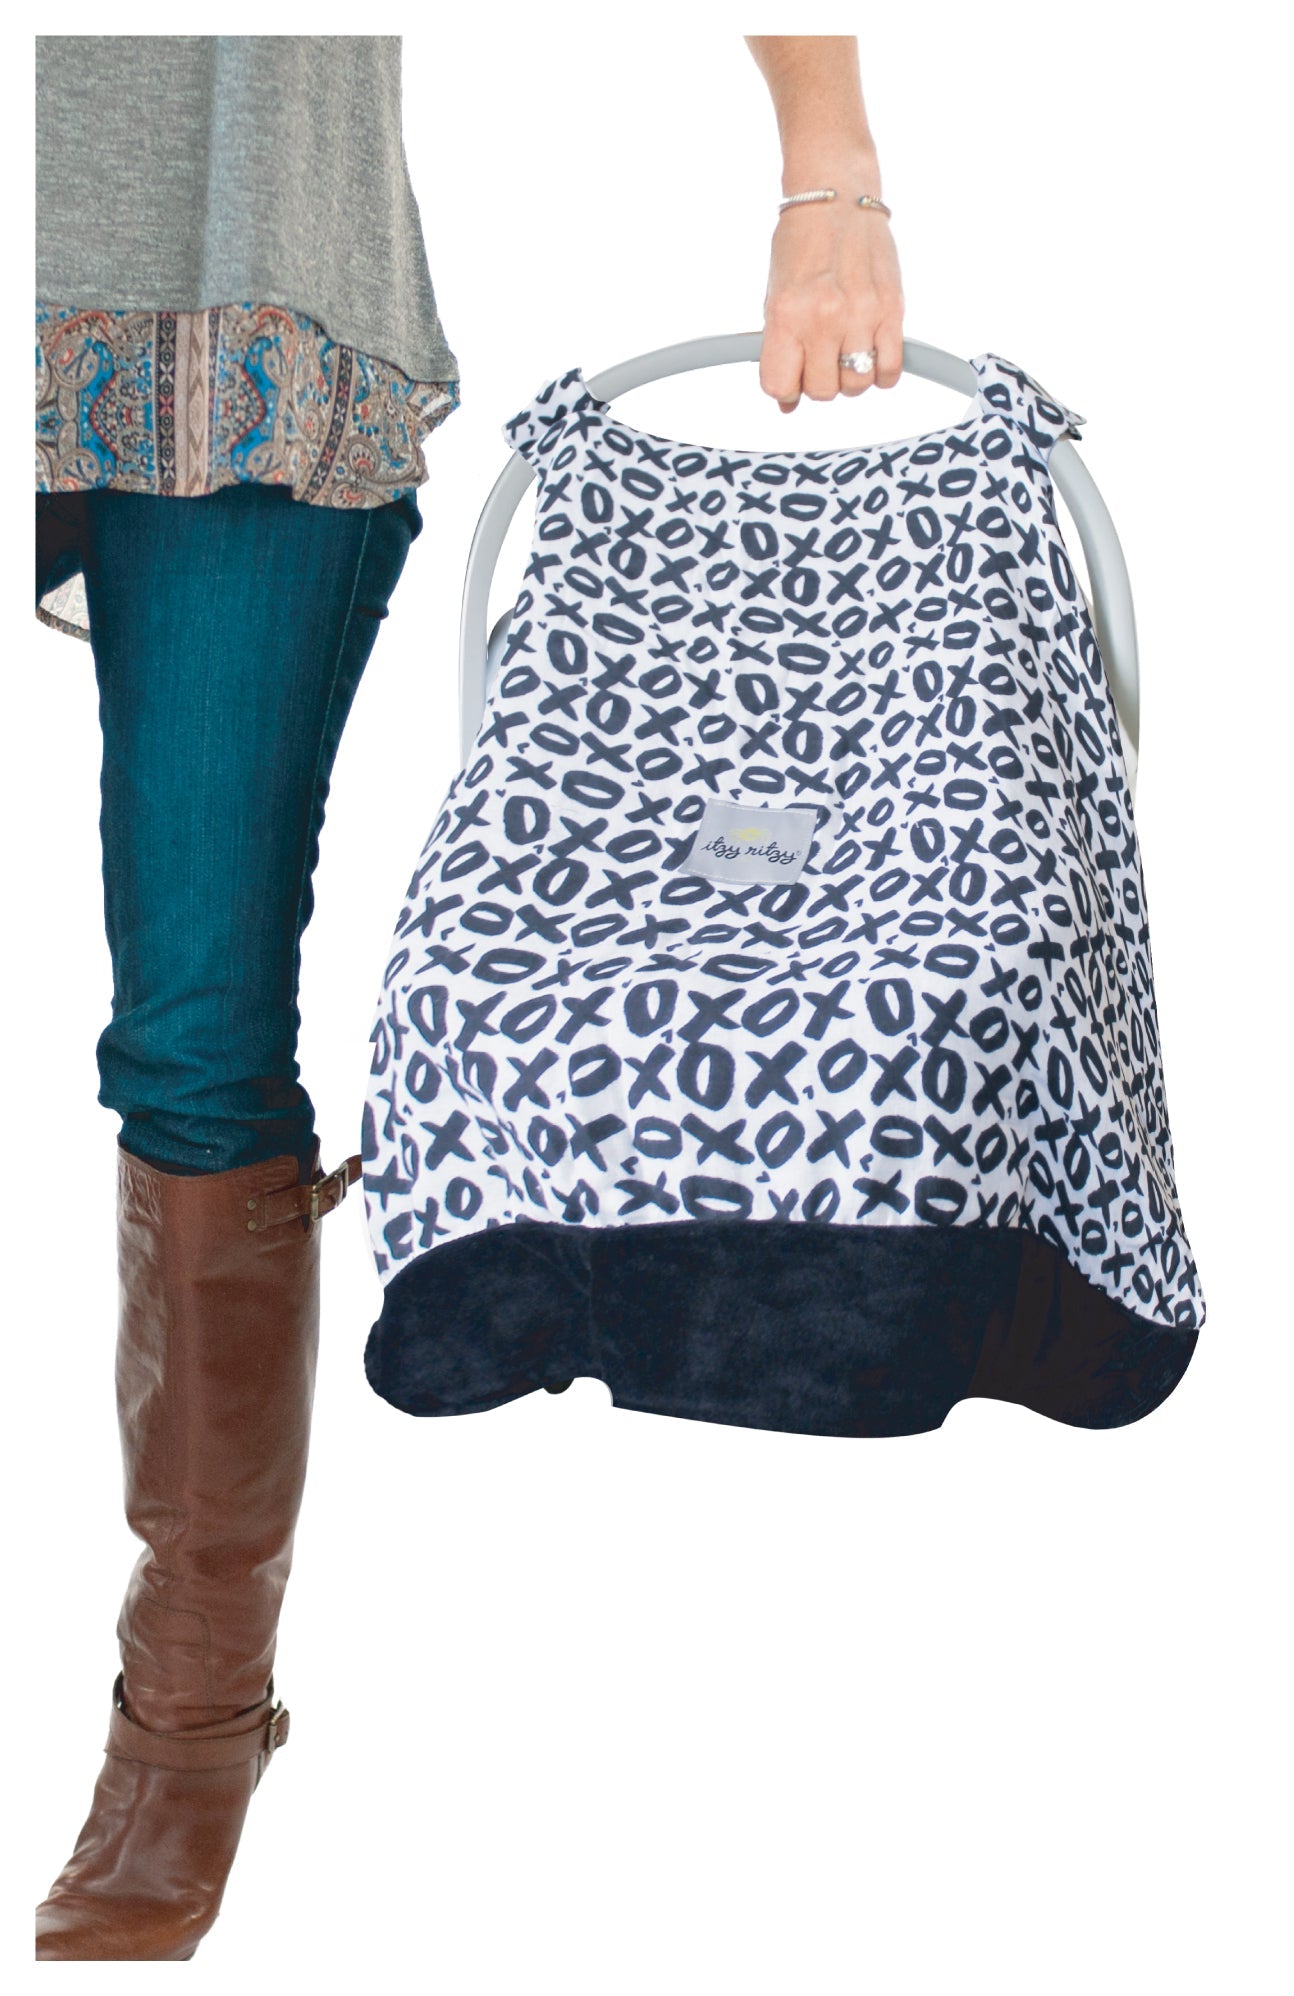 Cozy Happens™ Muslin Infant Car Seat Canopy - SuperMom Headquarters